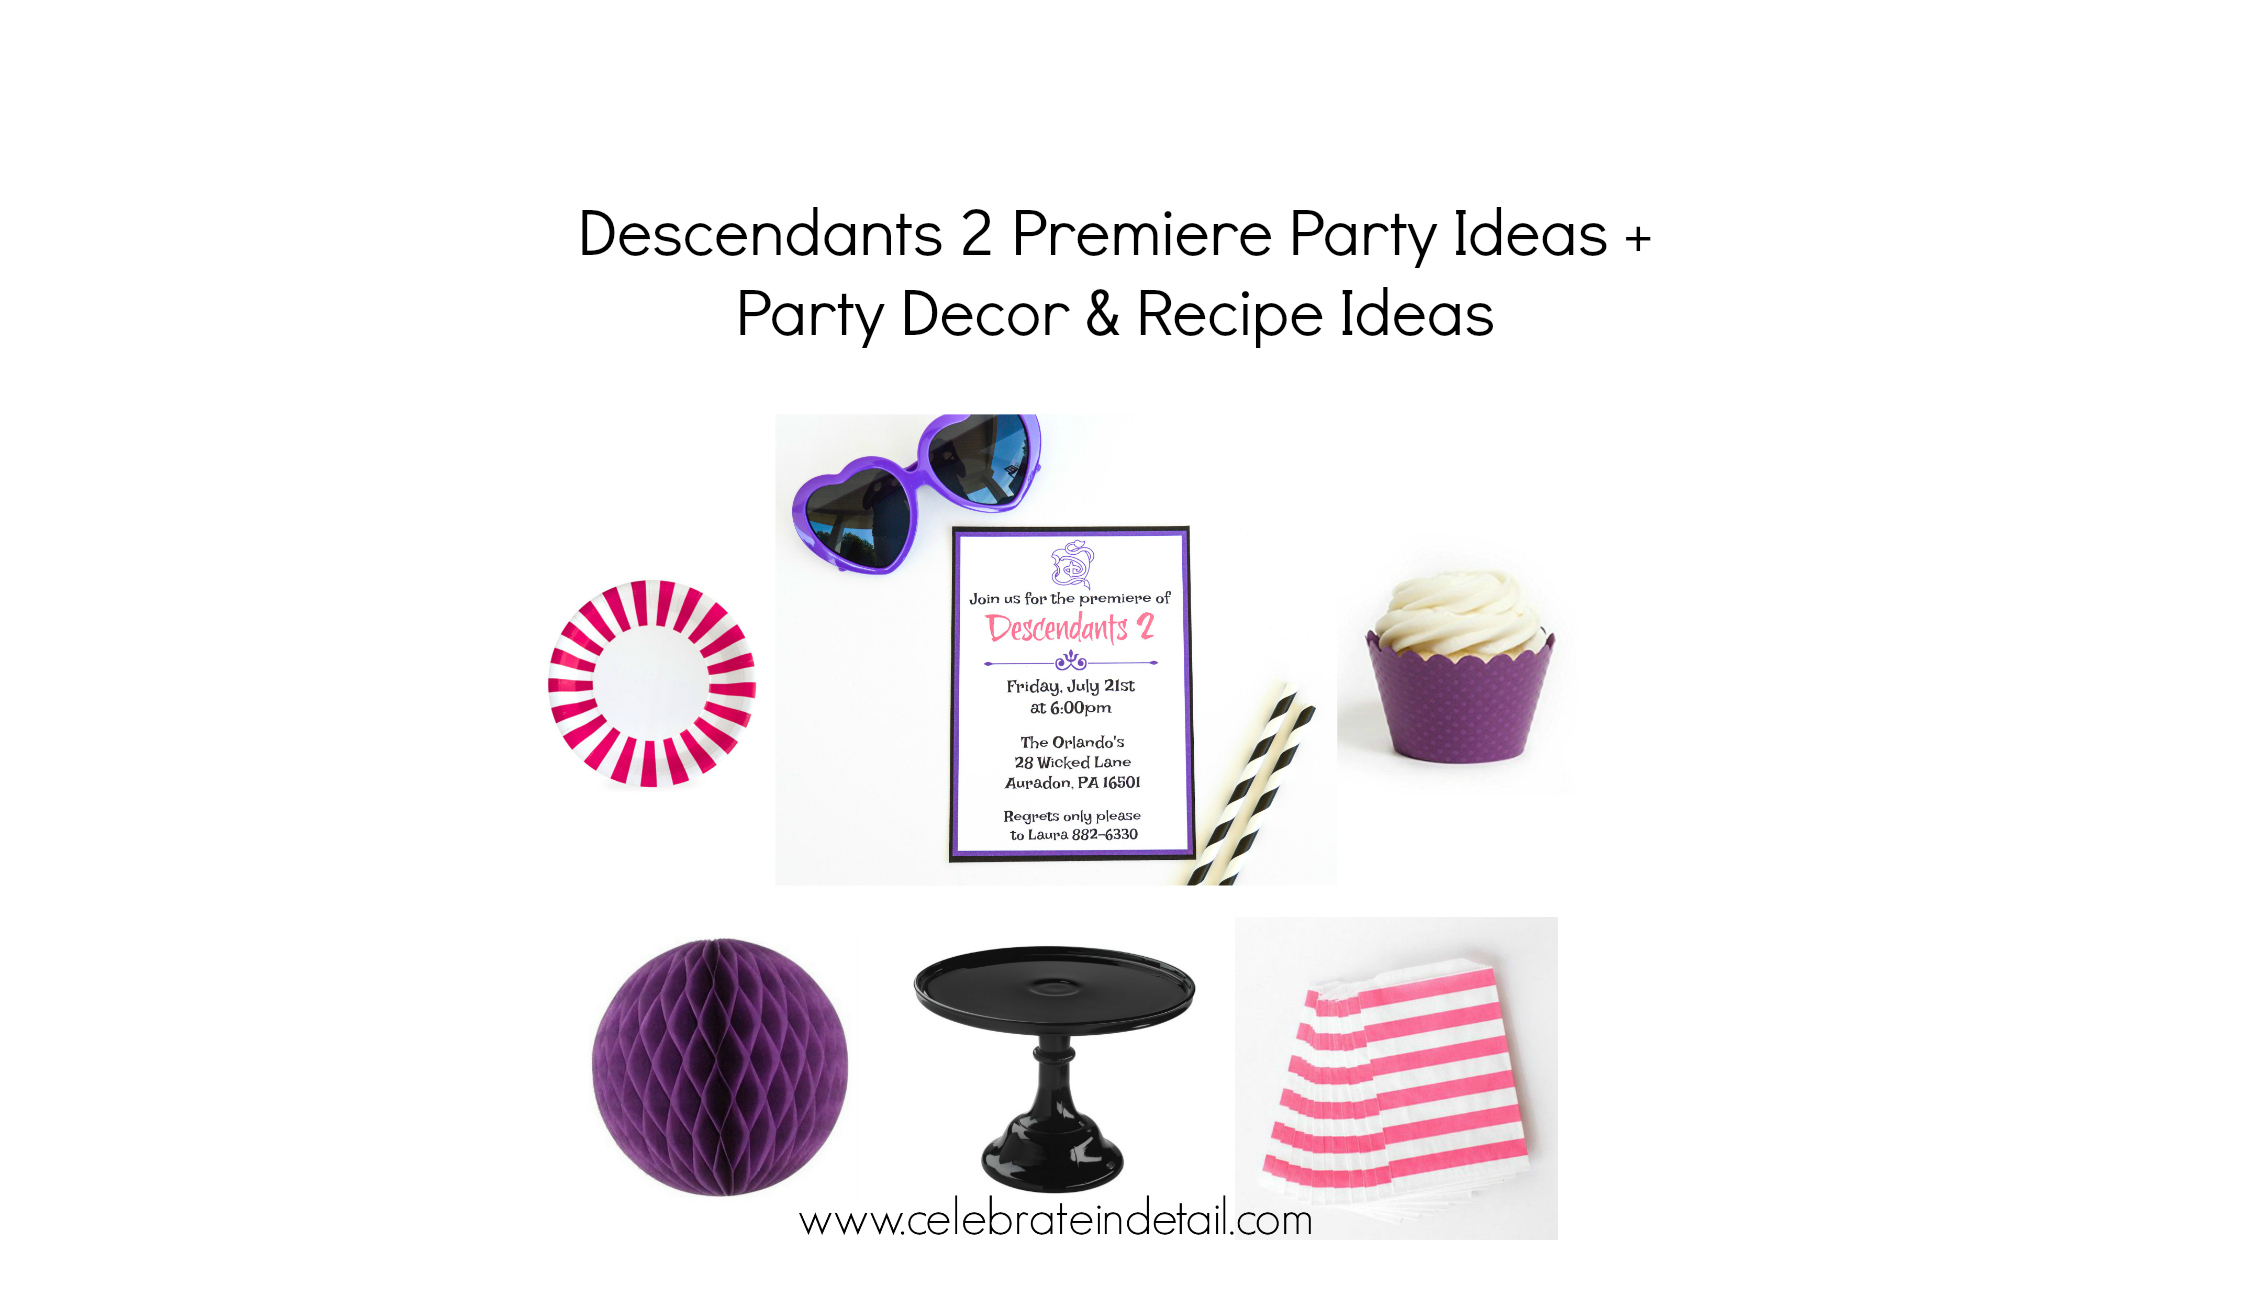 descendants 2 party ideas from celebrate in detail- free printable invitation and recipe and party decor